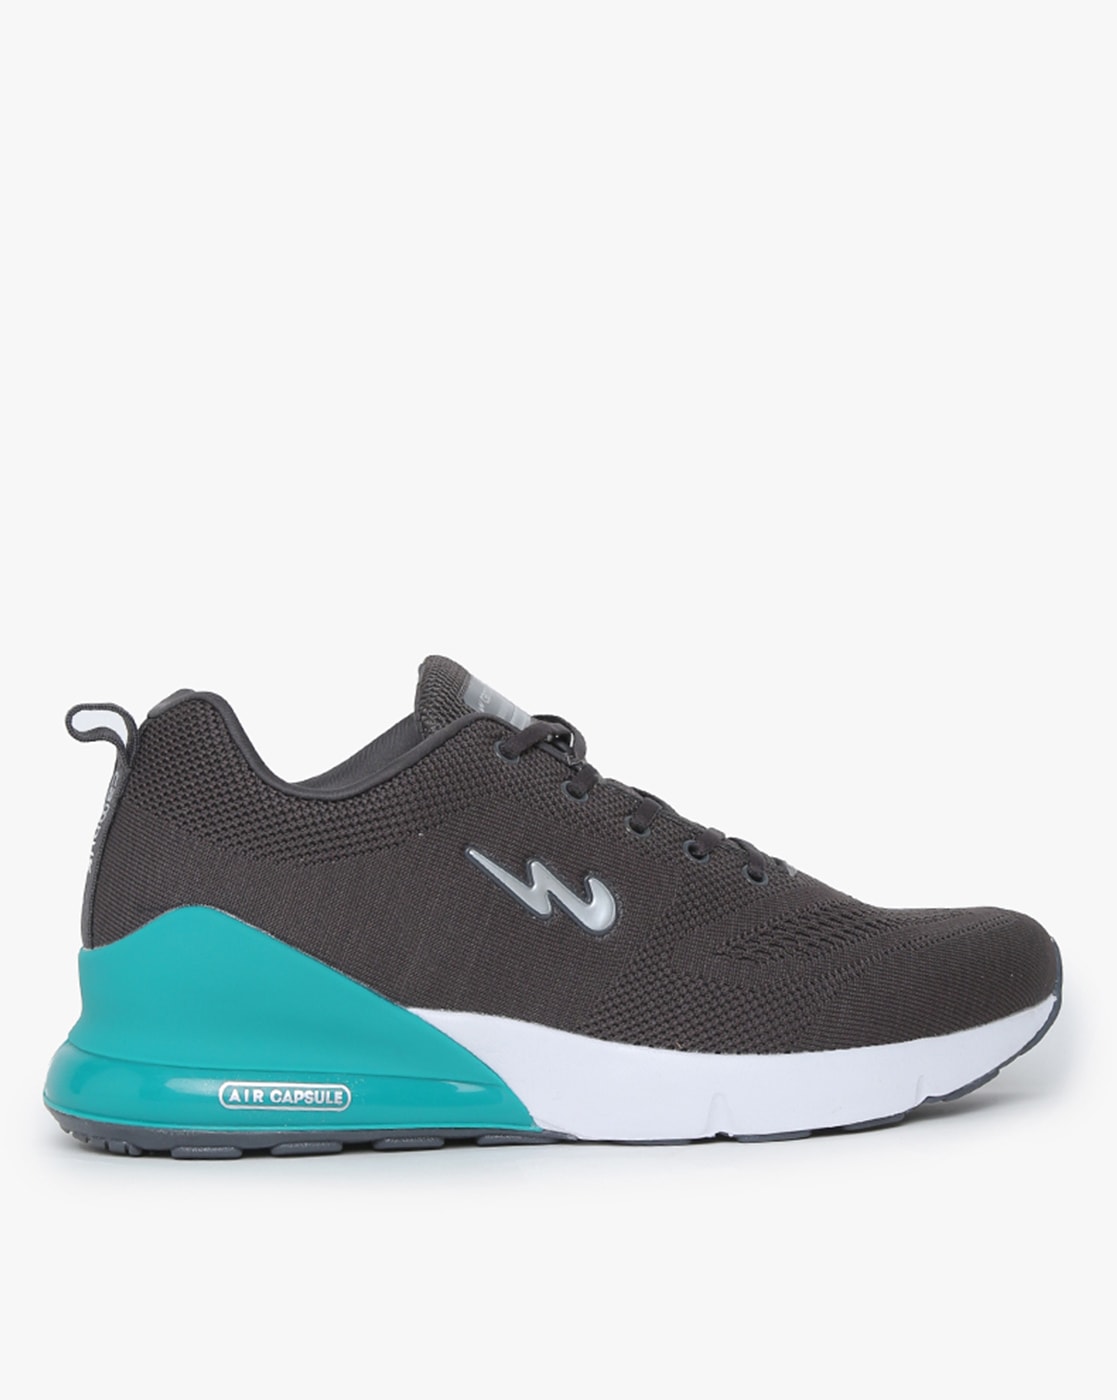 Buy Grey Sports Shoes for Men by Campus Online 